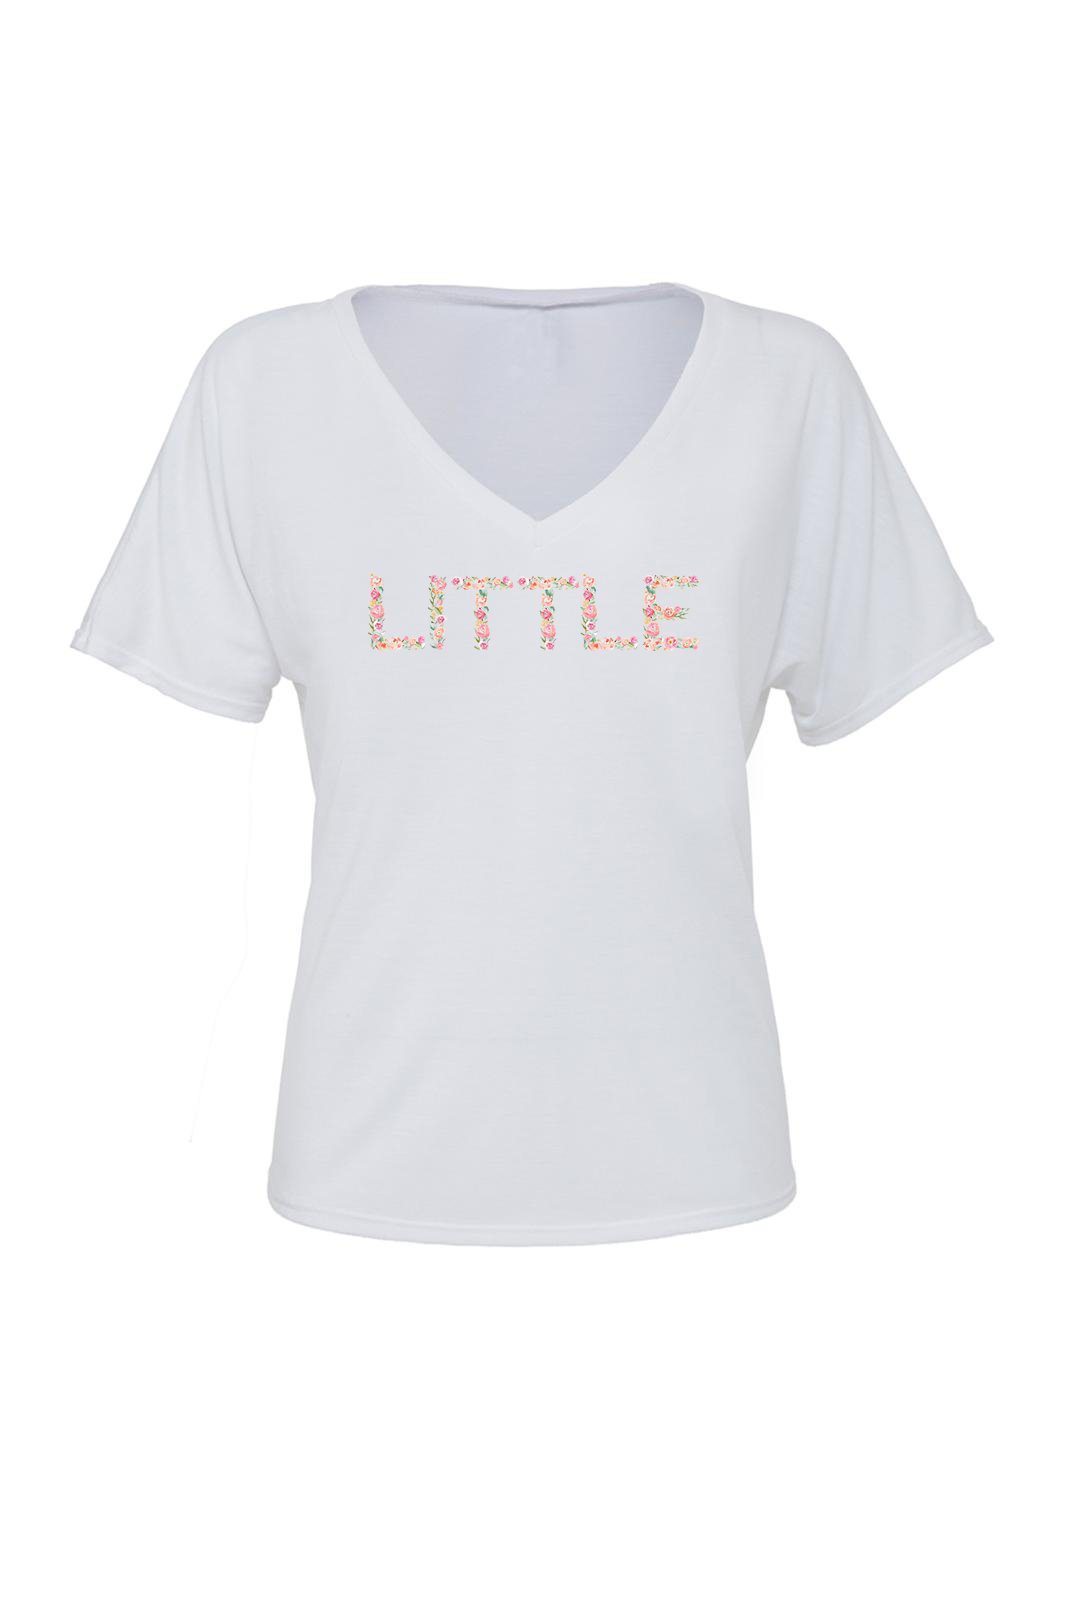 Big Little Floral Letters Shirt - Bella Slouchy V-Neck Short Sleeve, Ladies, Sunny and Southern, - Sunny and Southern,